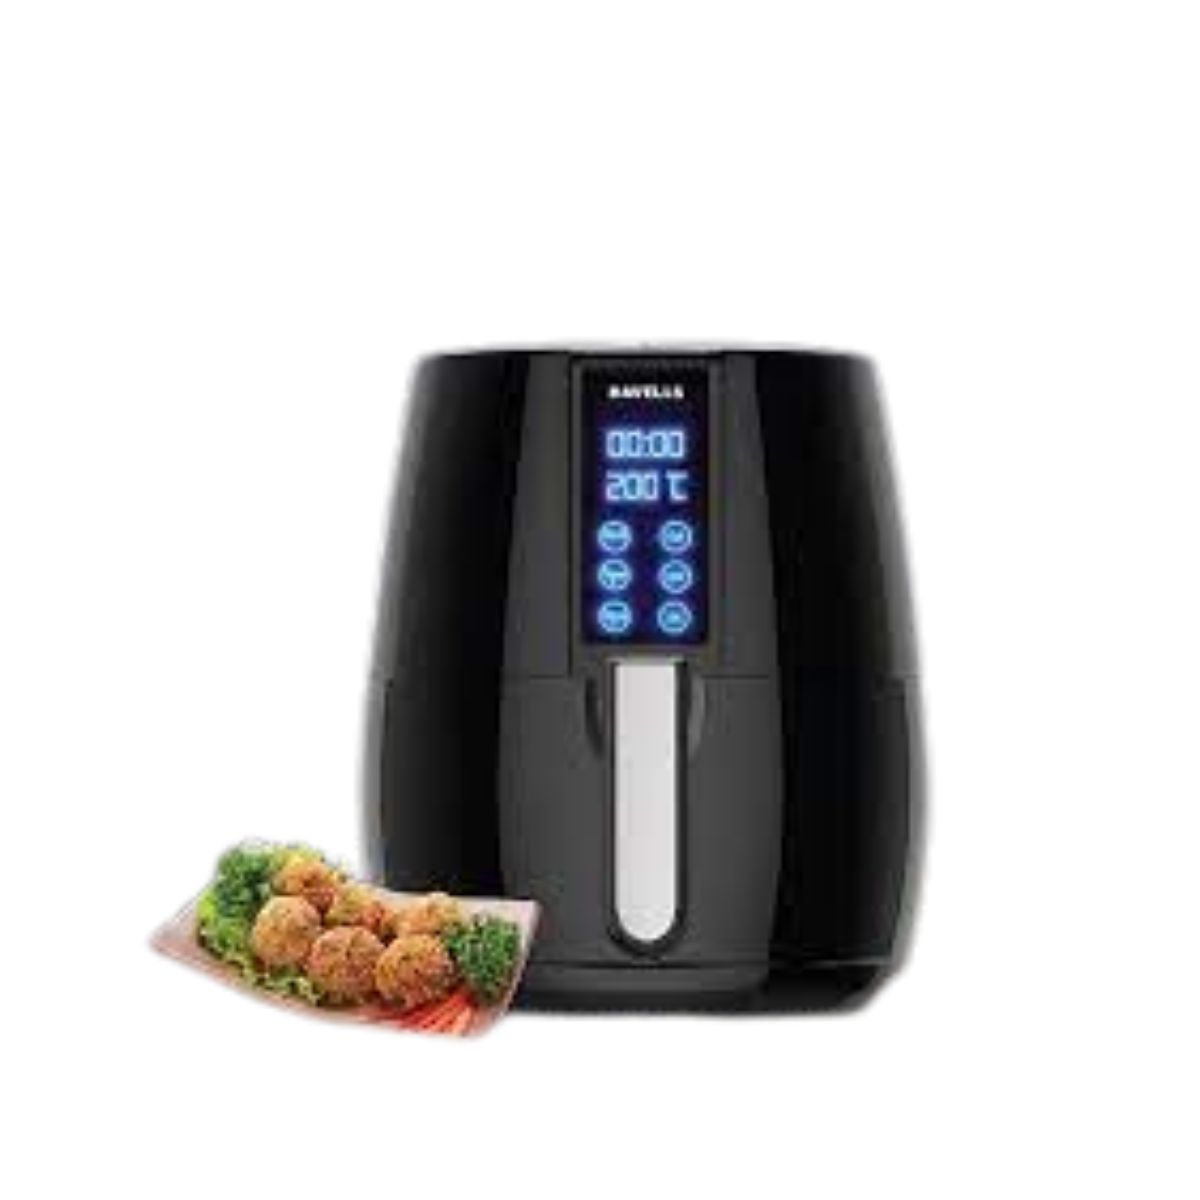 Havells Air Fryer Prolife Digi with 4L Capacity - Digital Touch Panel - Auto On/Off - 60 Min Timer - Basket Release Button - Air Filtration System - Black